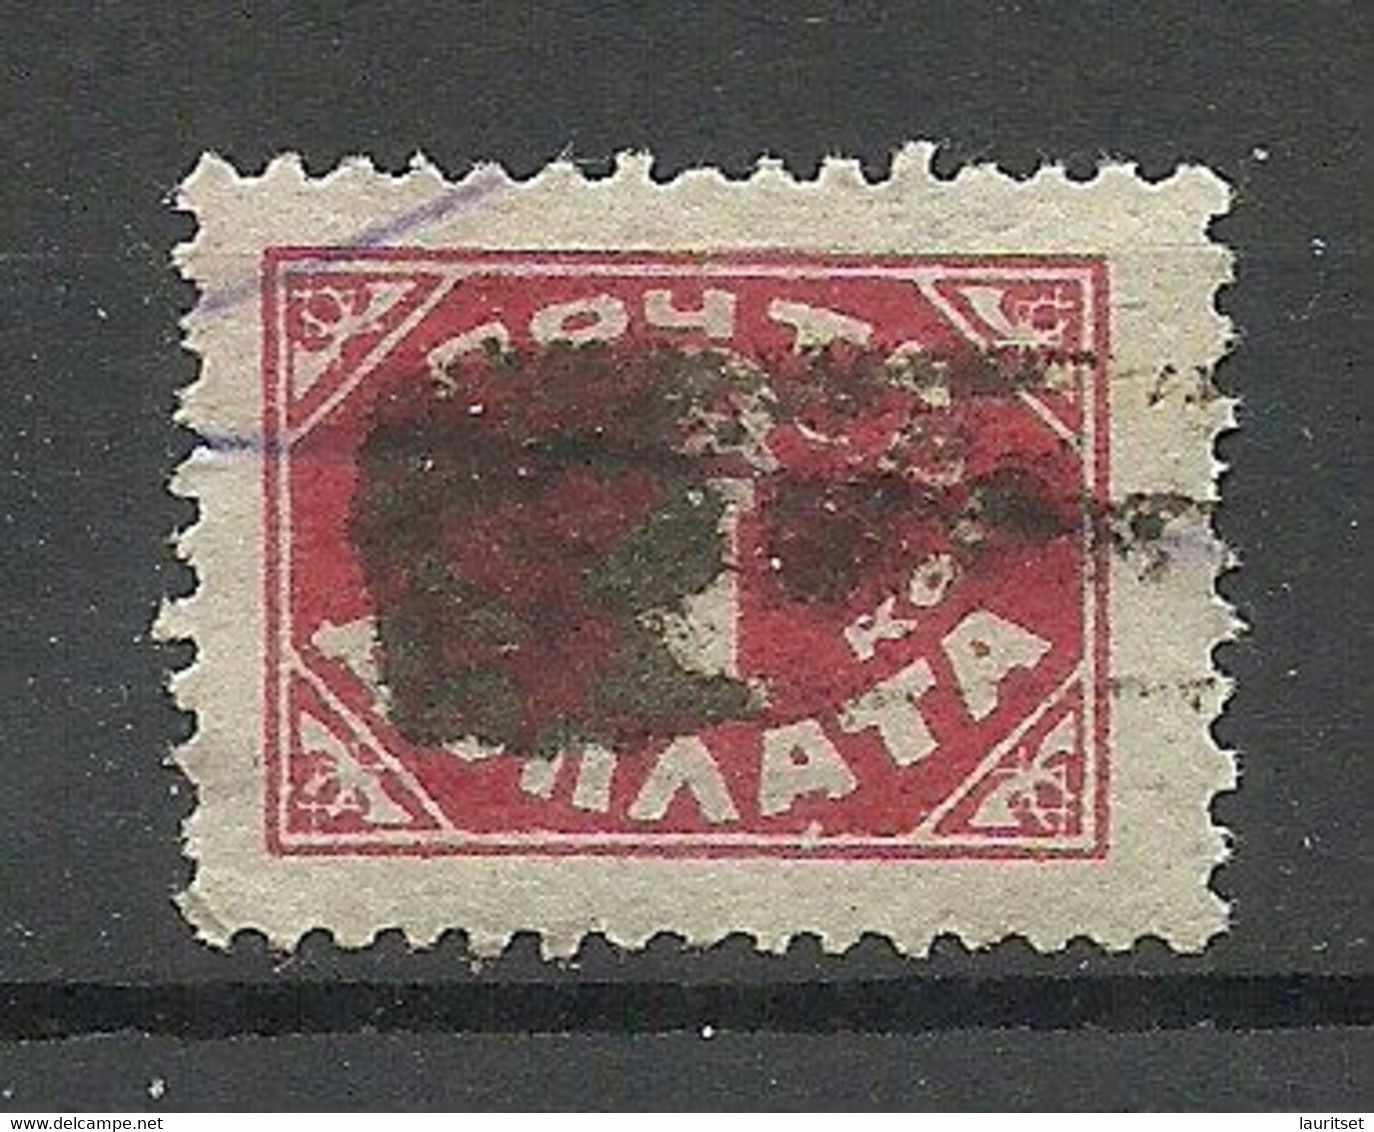 RUSSLAND RUSSIA 1925 Porto Postage Due Michel 11 O Without Wm - Postage Due